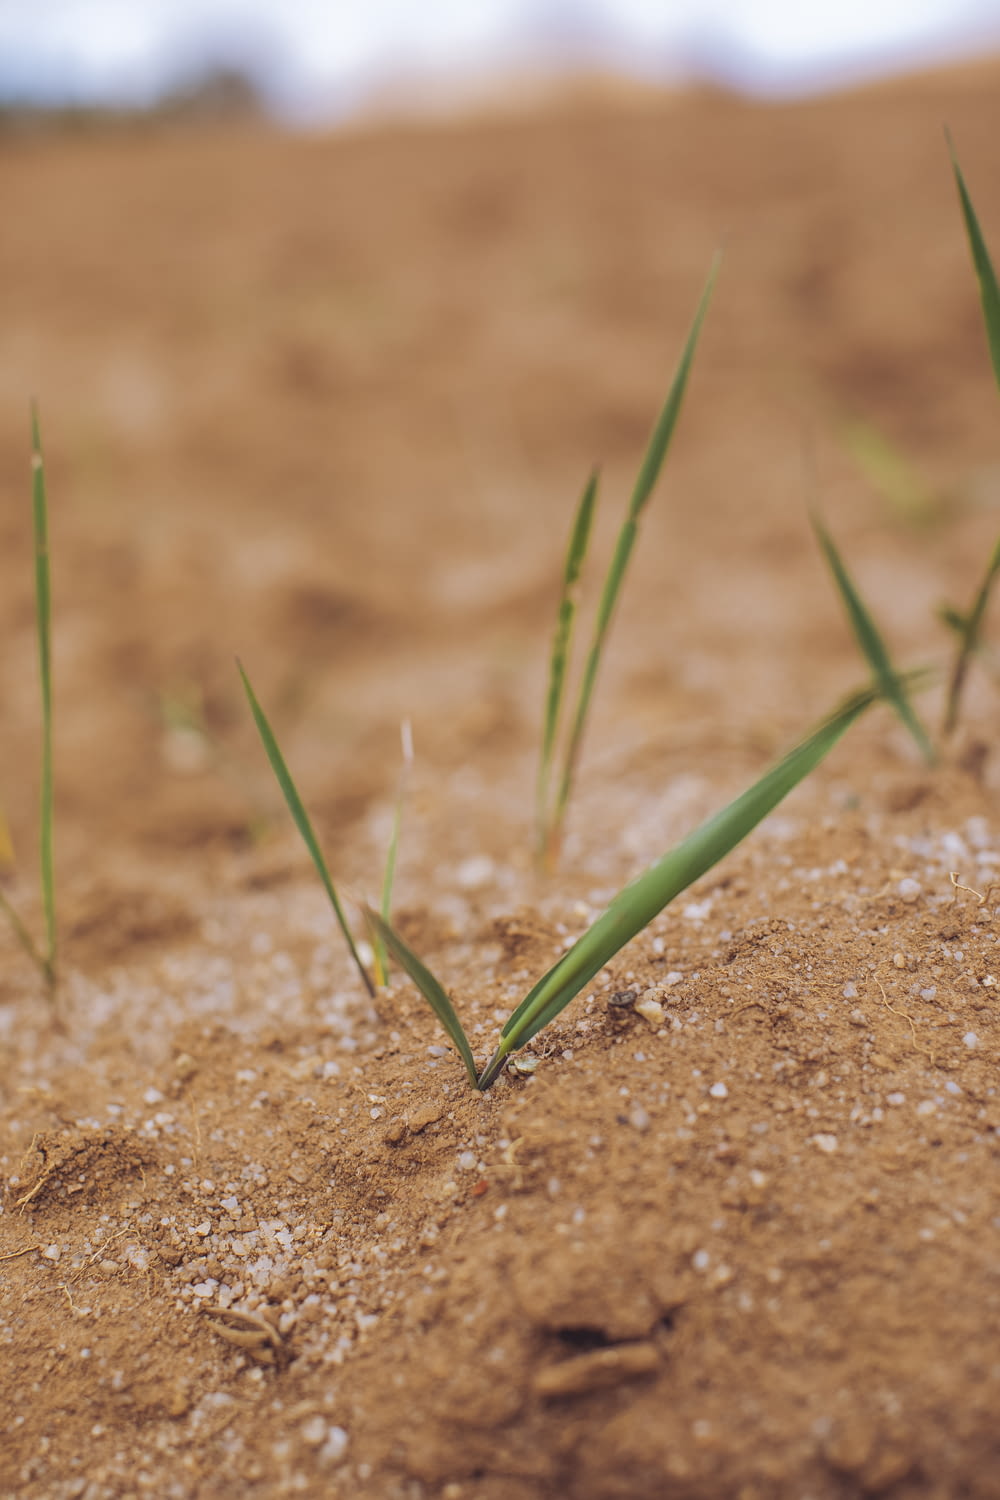 a close up of some grass growing in the dirt